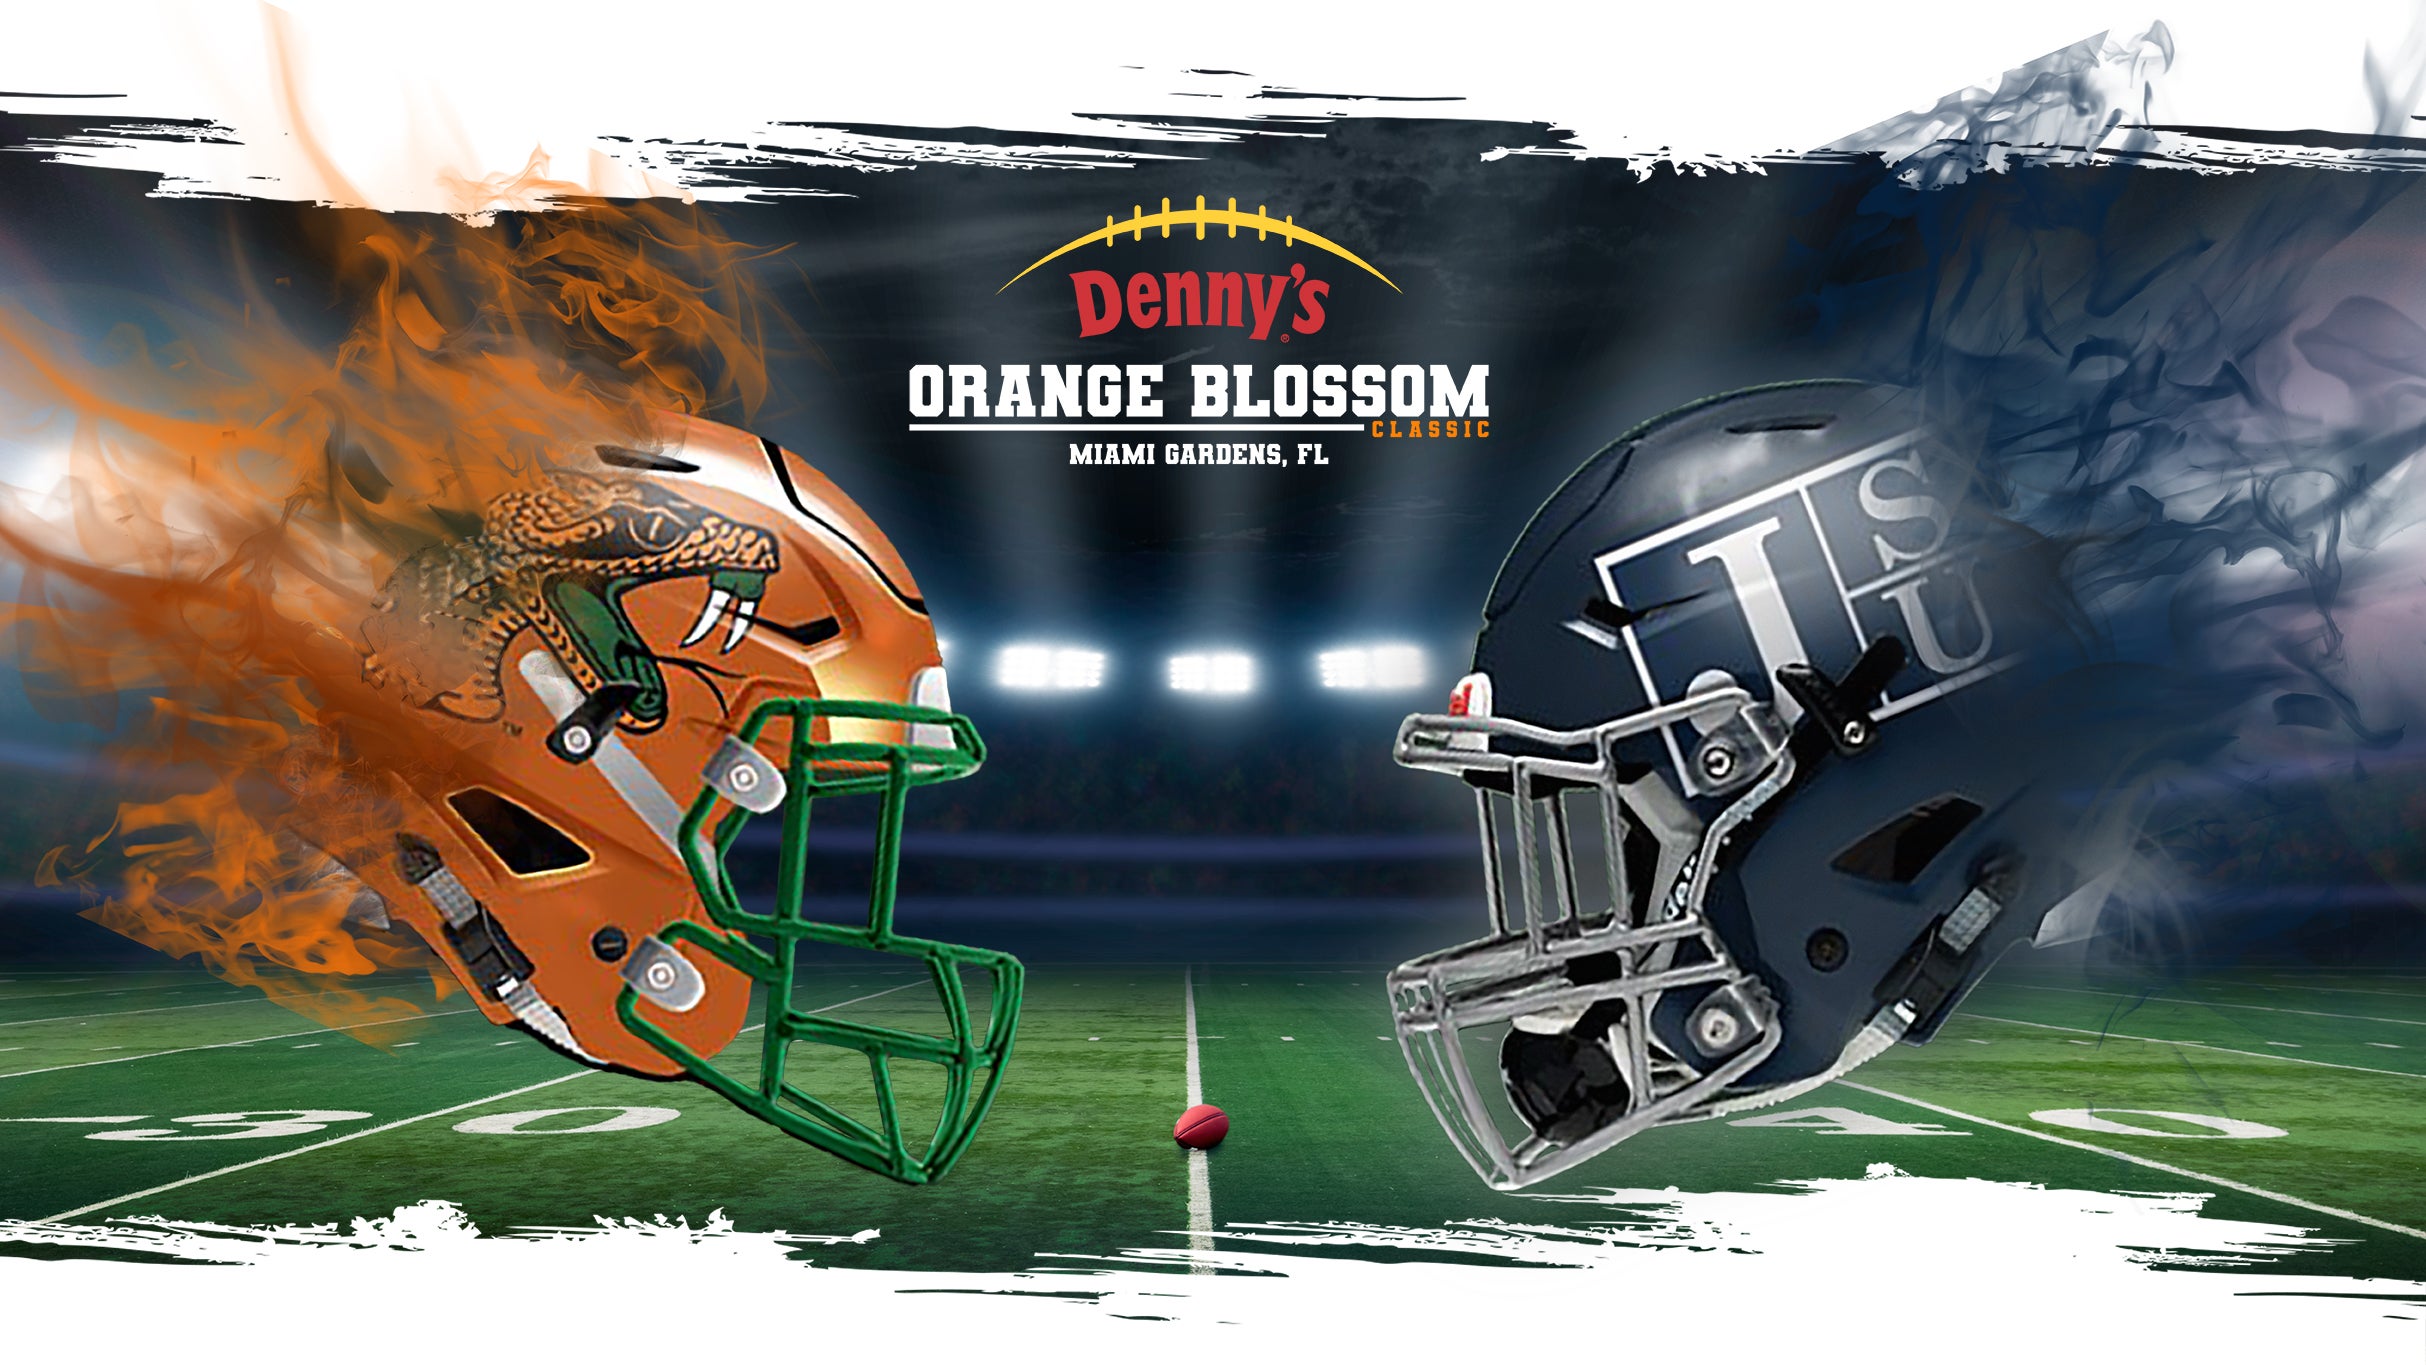 Image used with permission from Ticketmaster | Dennys Orange Blossom Classic tickets